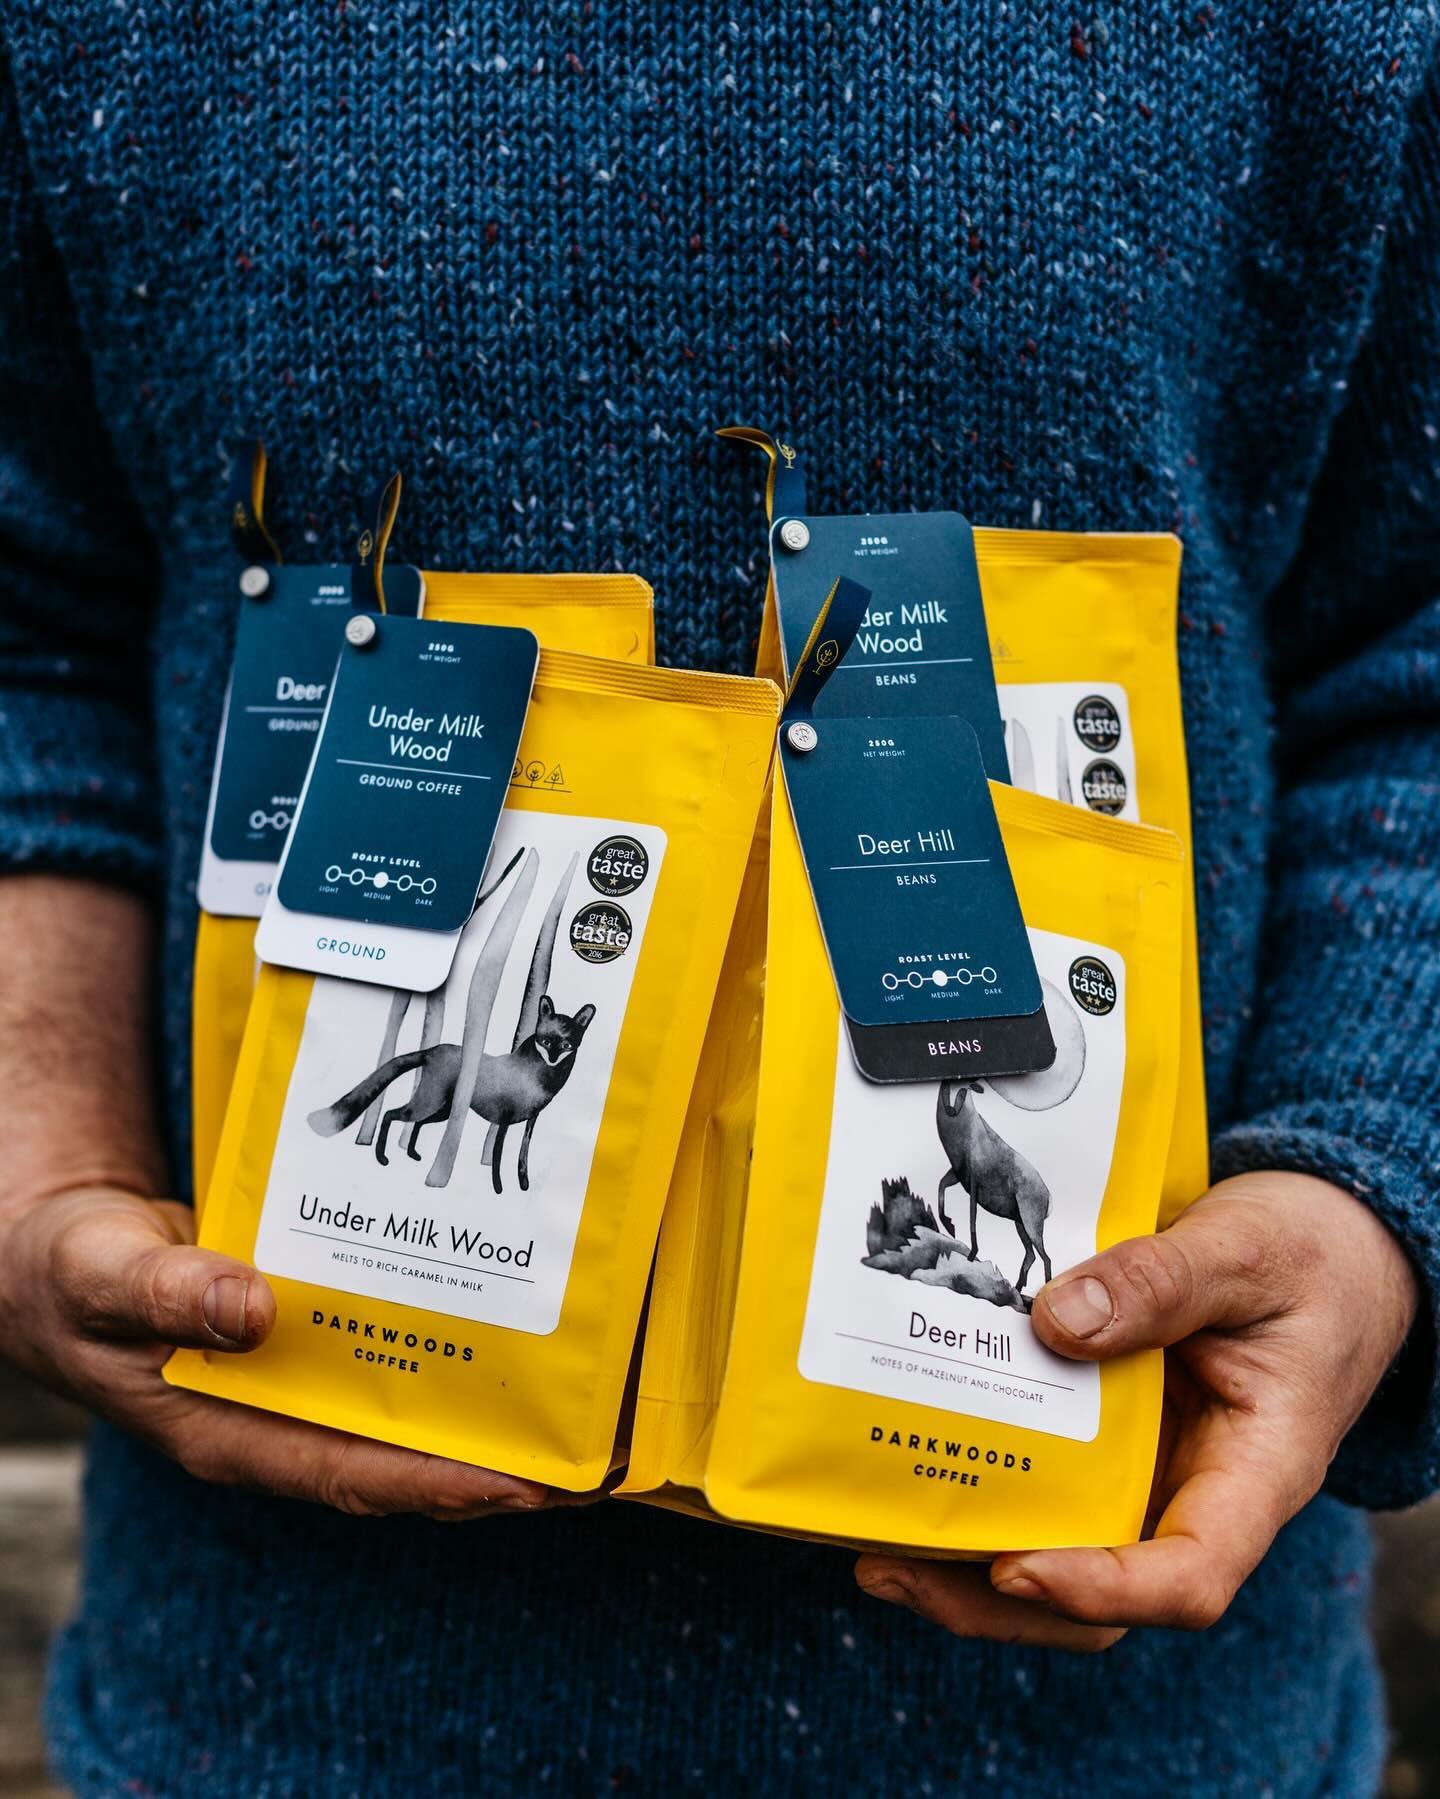 Ramble Store Pantry has a selection of goods from independent shops. From coffee roasted in Slaithwaite, to truffles and hot chocolate made in Cornwall, and honey from Scottish bees. There is something for everyone to have as a little treat 🍯